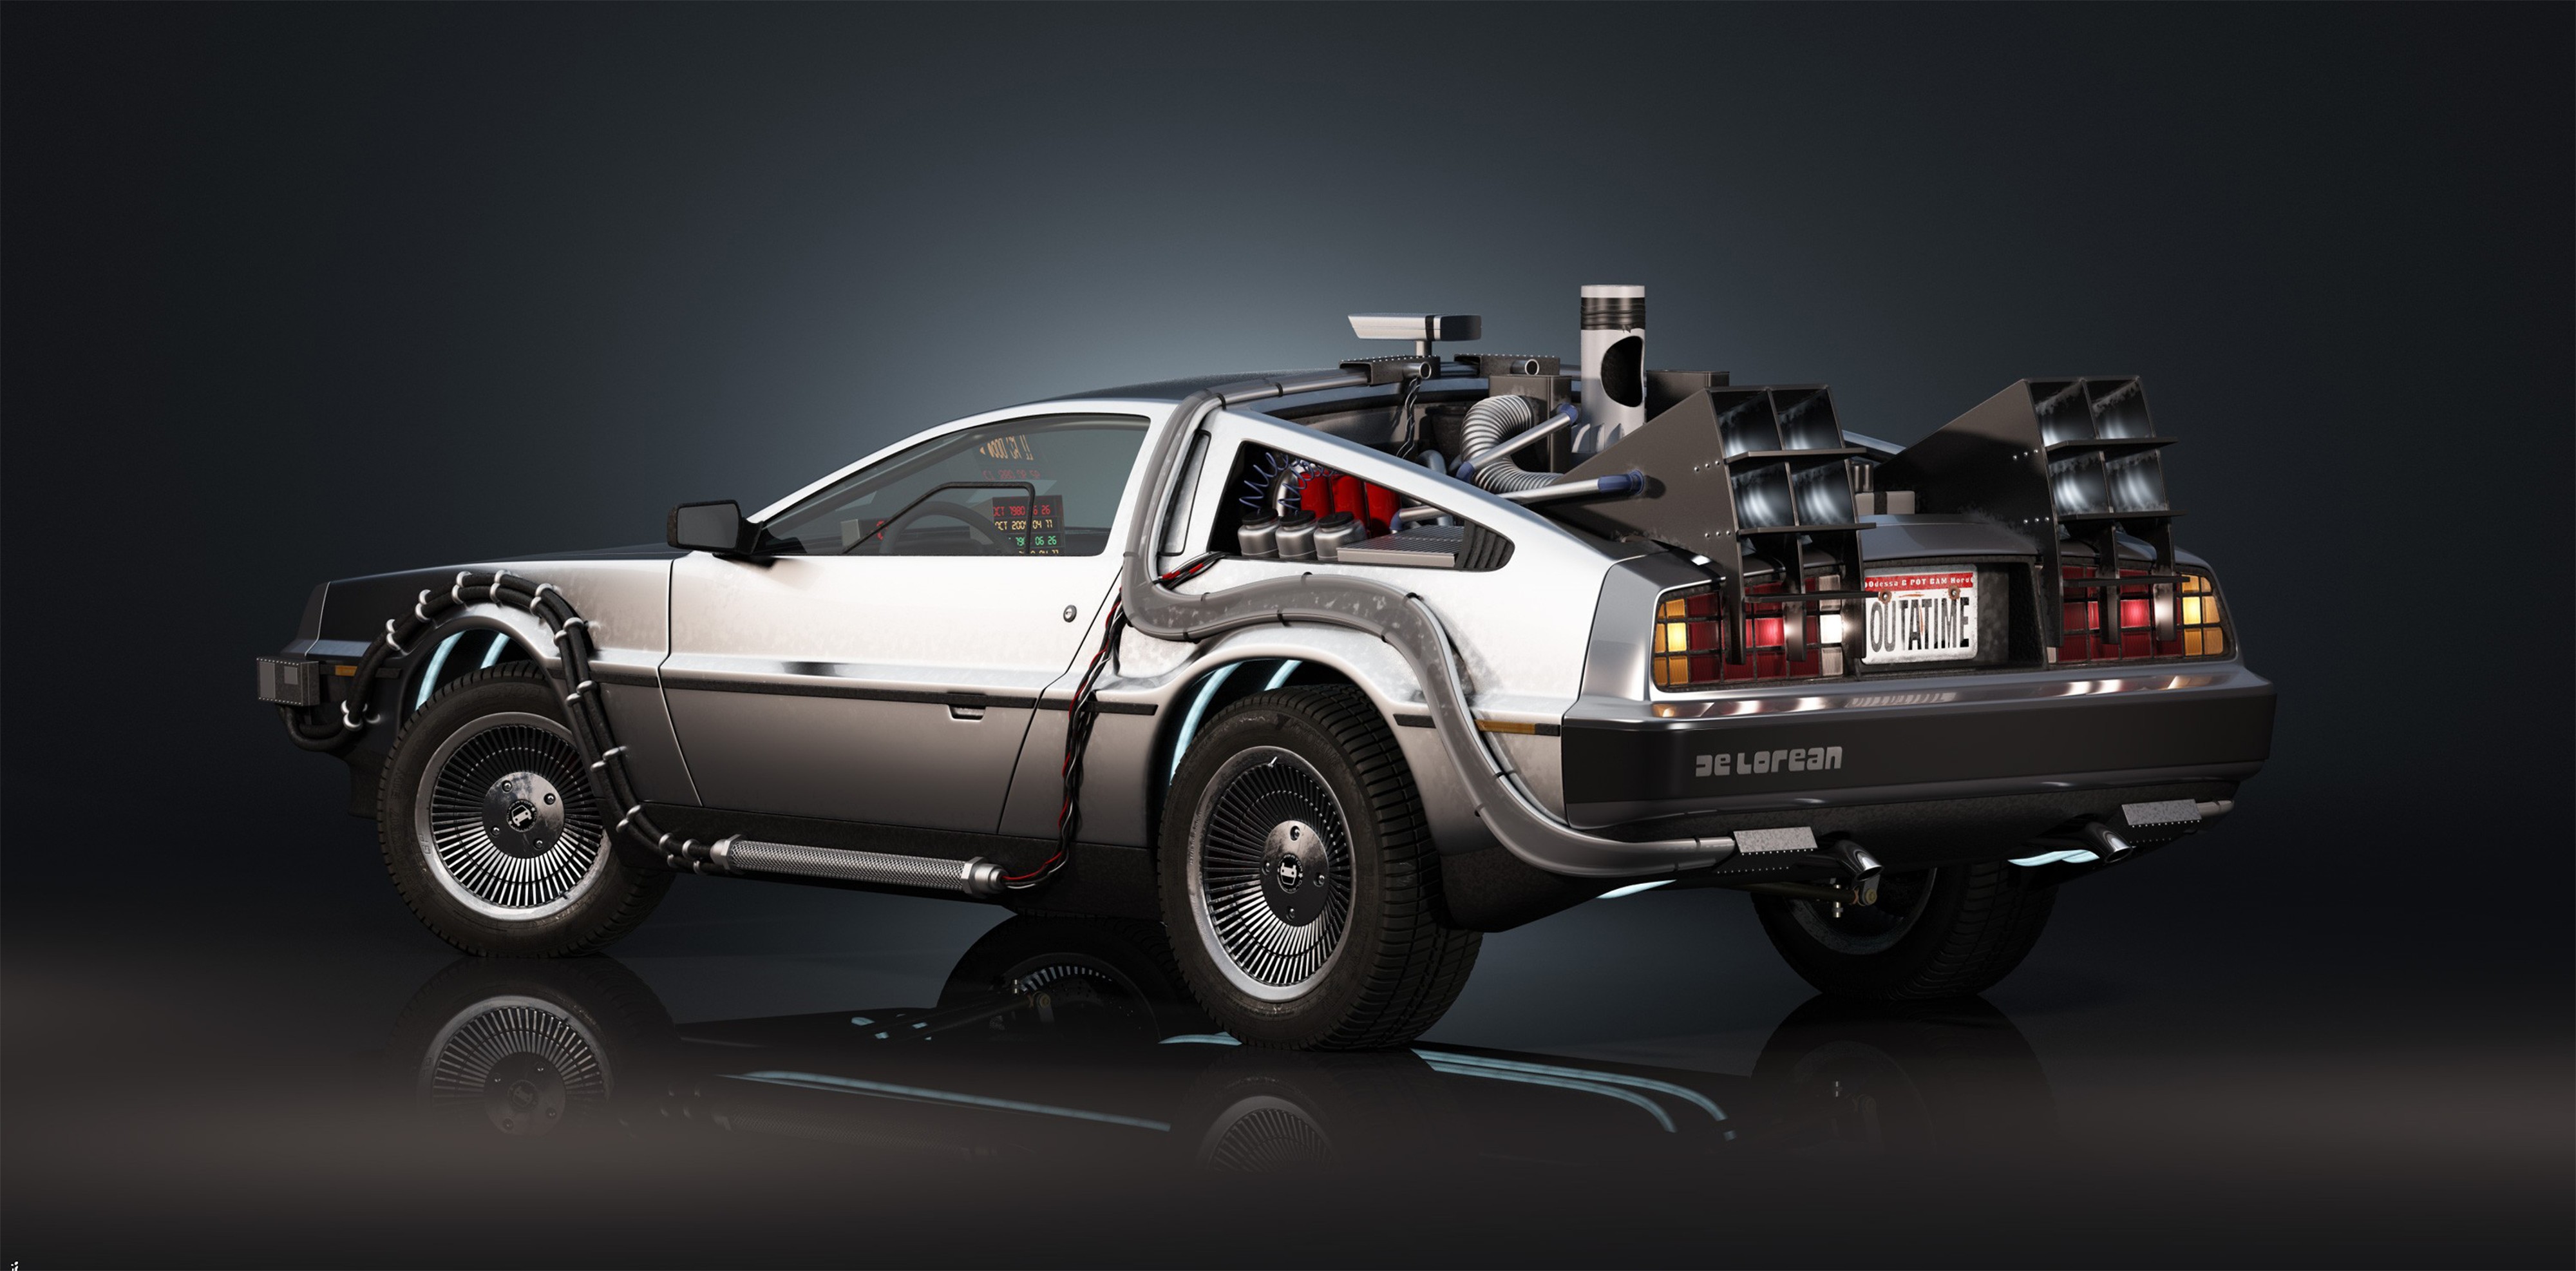 Back To The Future Science Fiction Science Fiction DeLorean Movies Time Travel Car Vehicle Time Mach 4000x1973